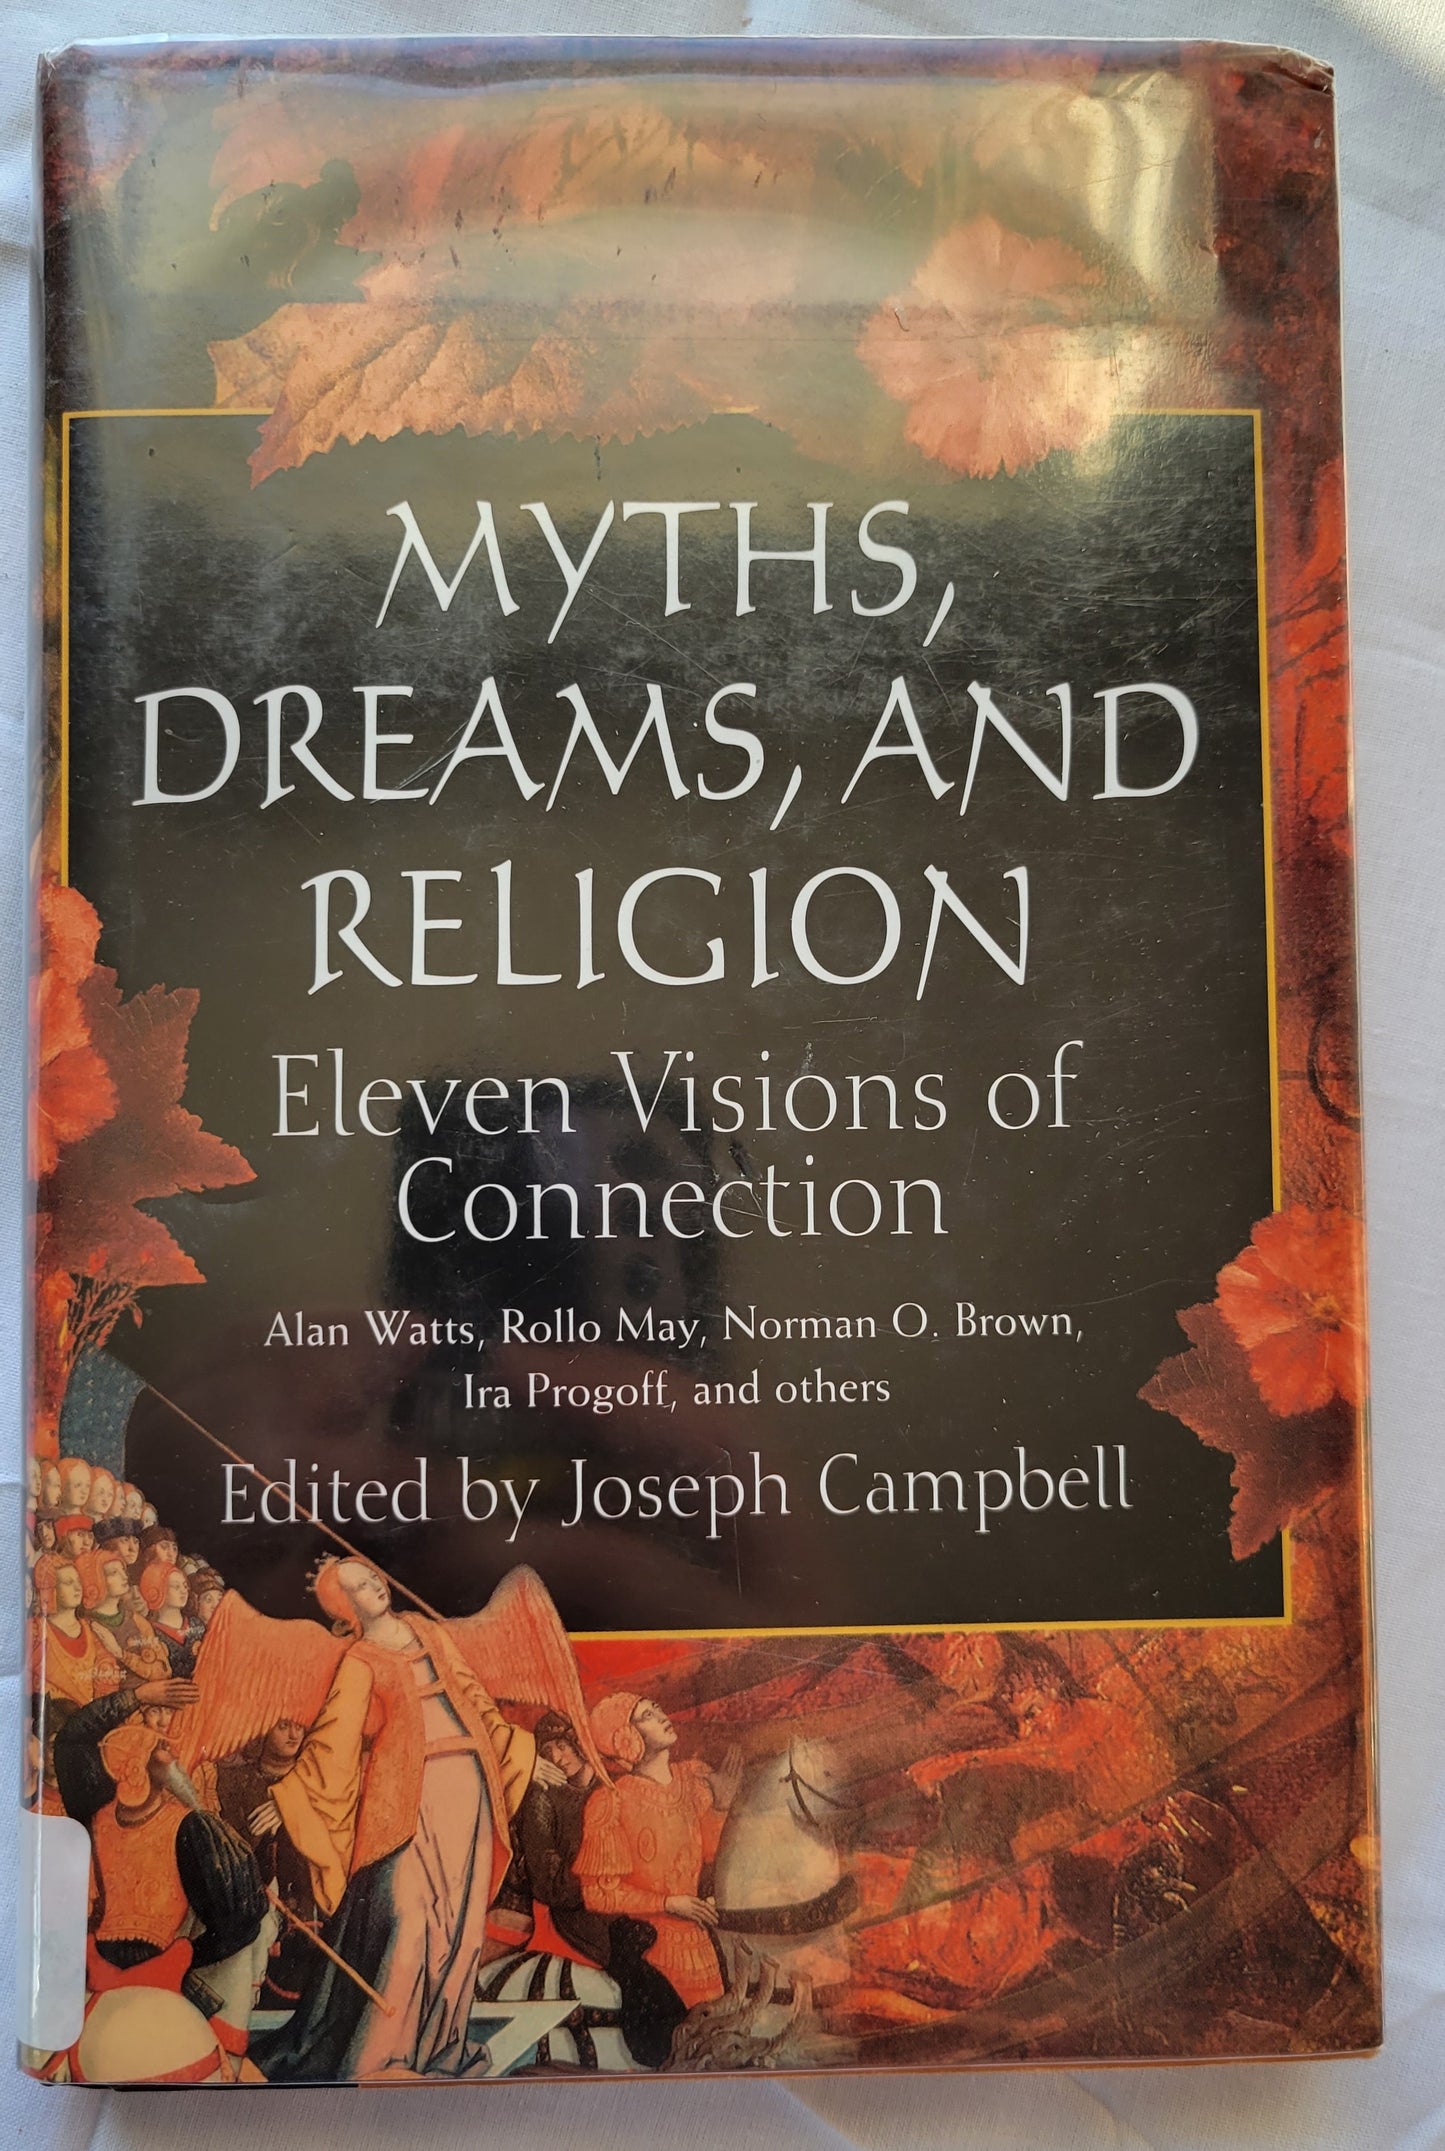 Used book for sale, "Myths, Dreams, and Religion" is a collection of essays by various authors - including Alan Watts, John F. Priest, and more - and is edited by the famous Joseph Campbell. View of front cover.